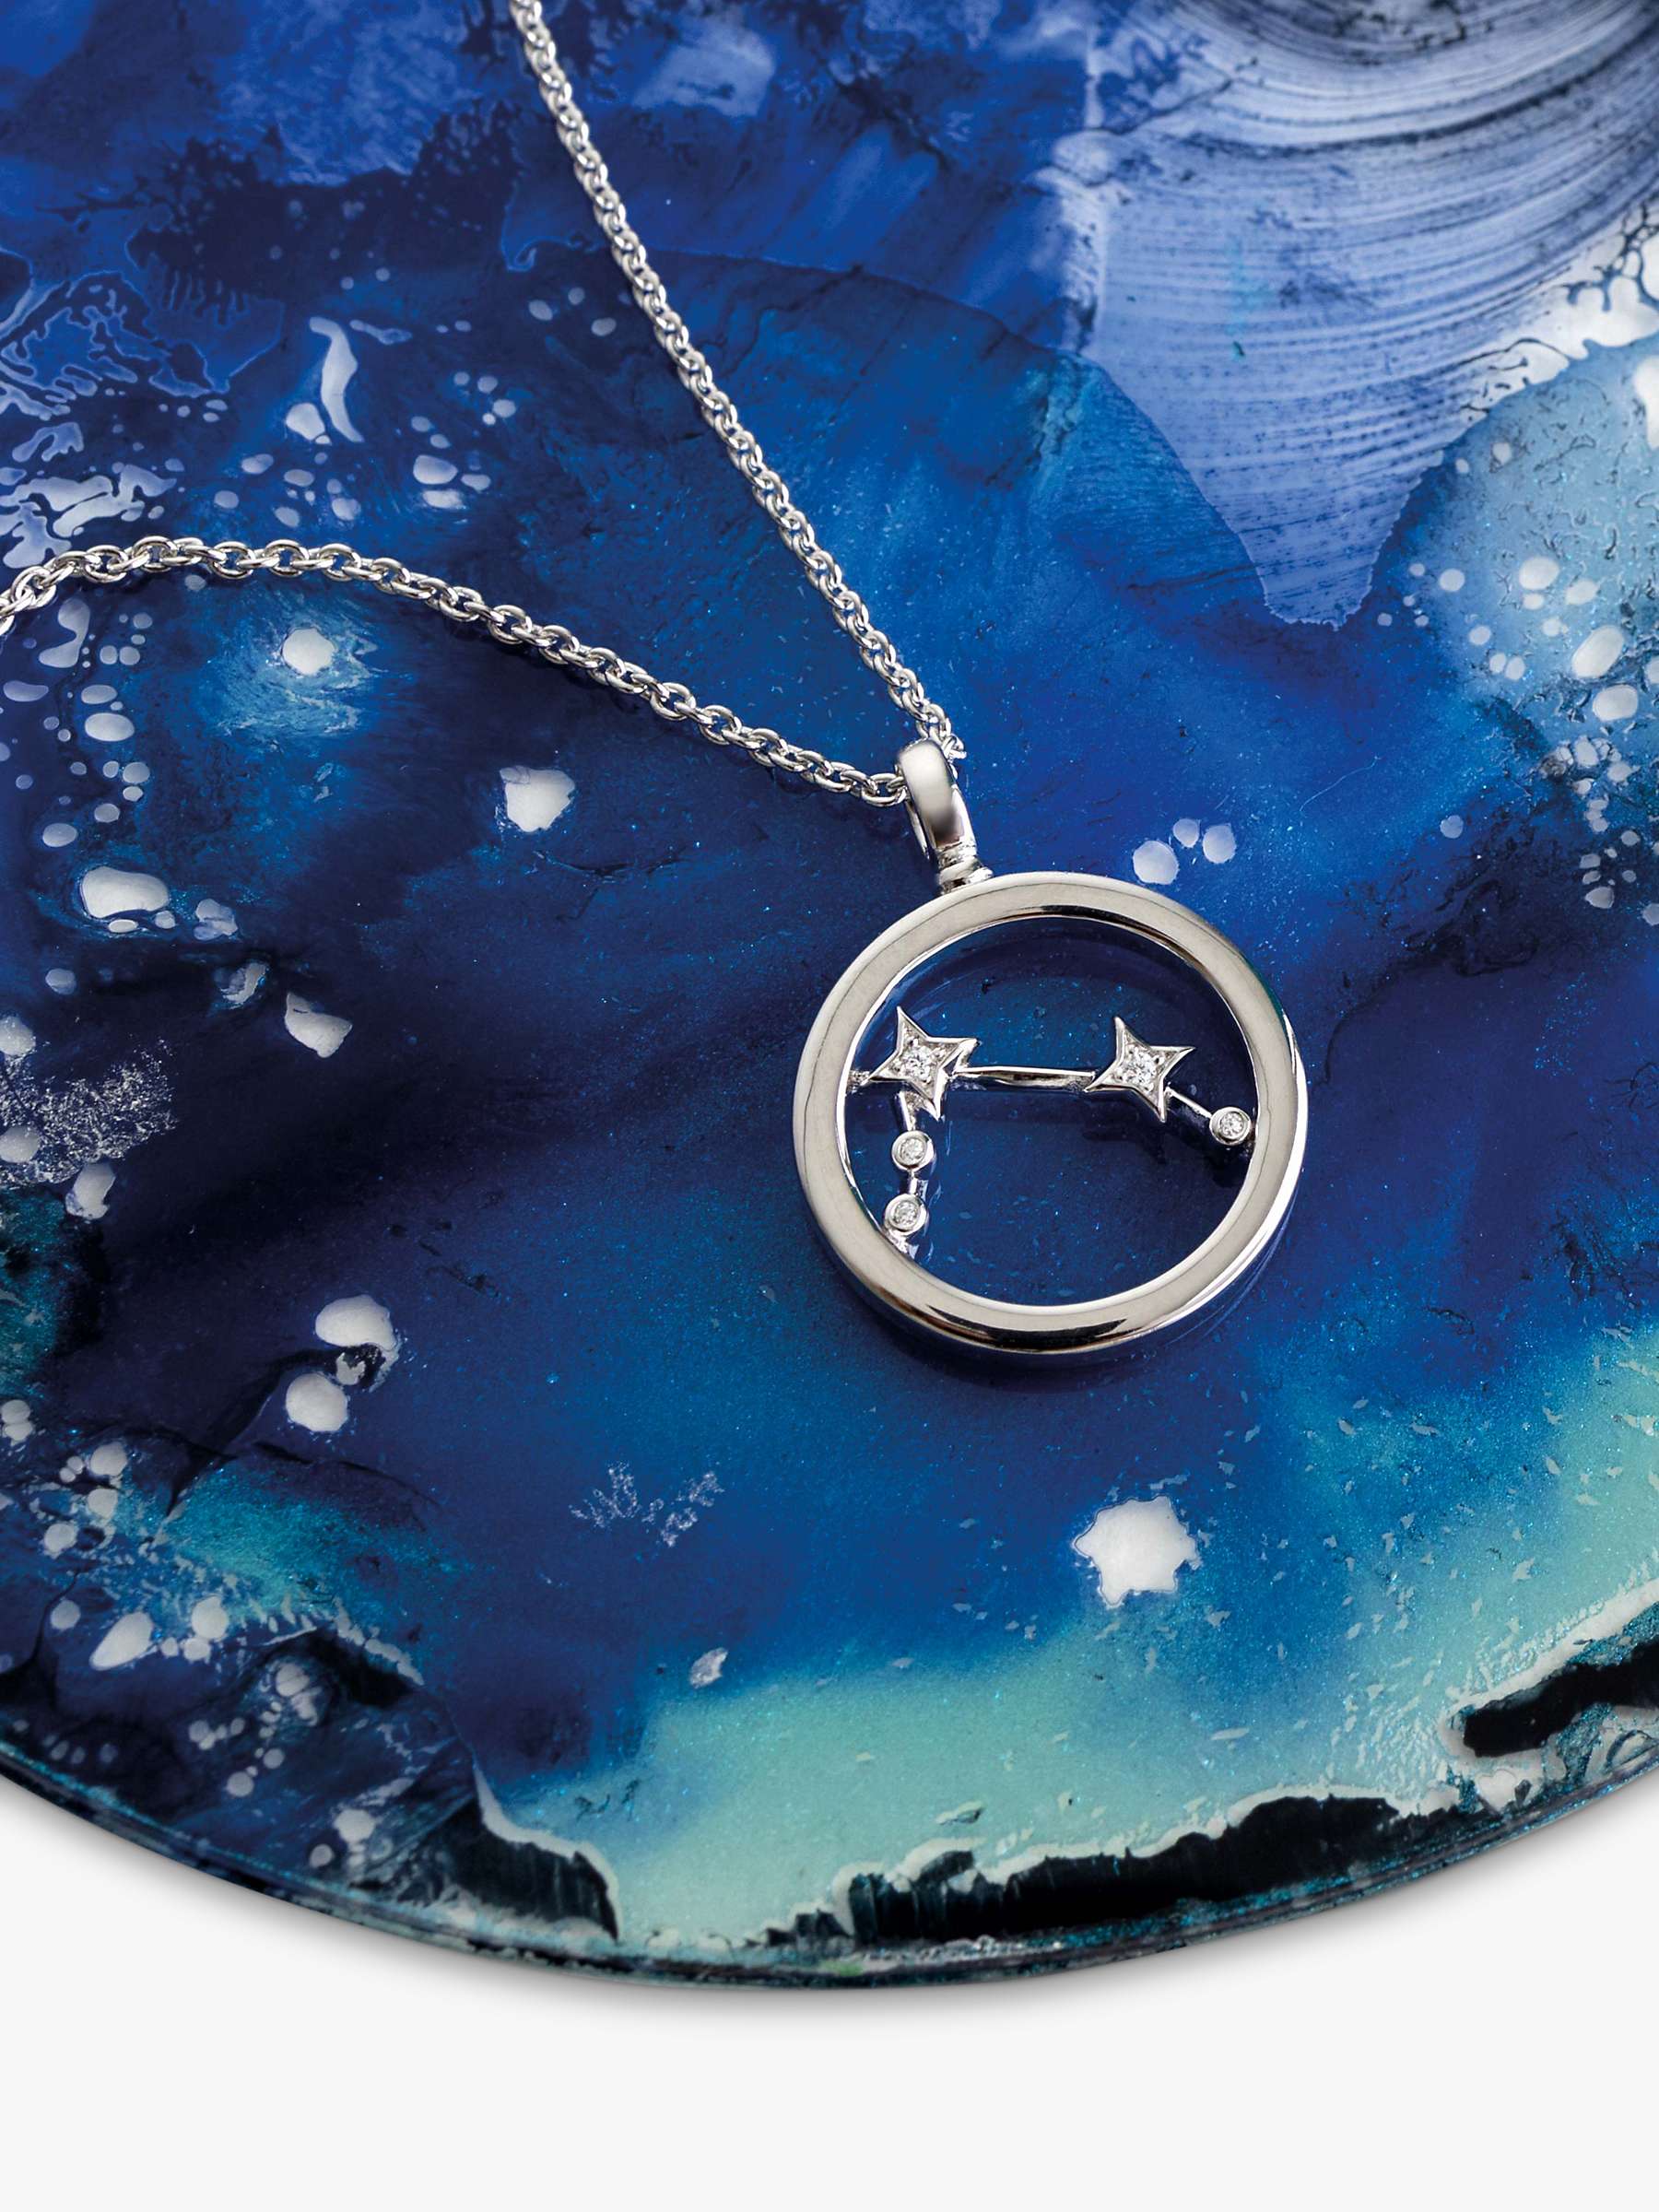 Buy Kit Heath Aries Constellation Pendant Necklace, Silver Online at johnlewis.com